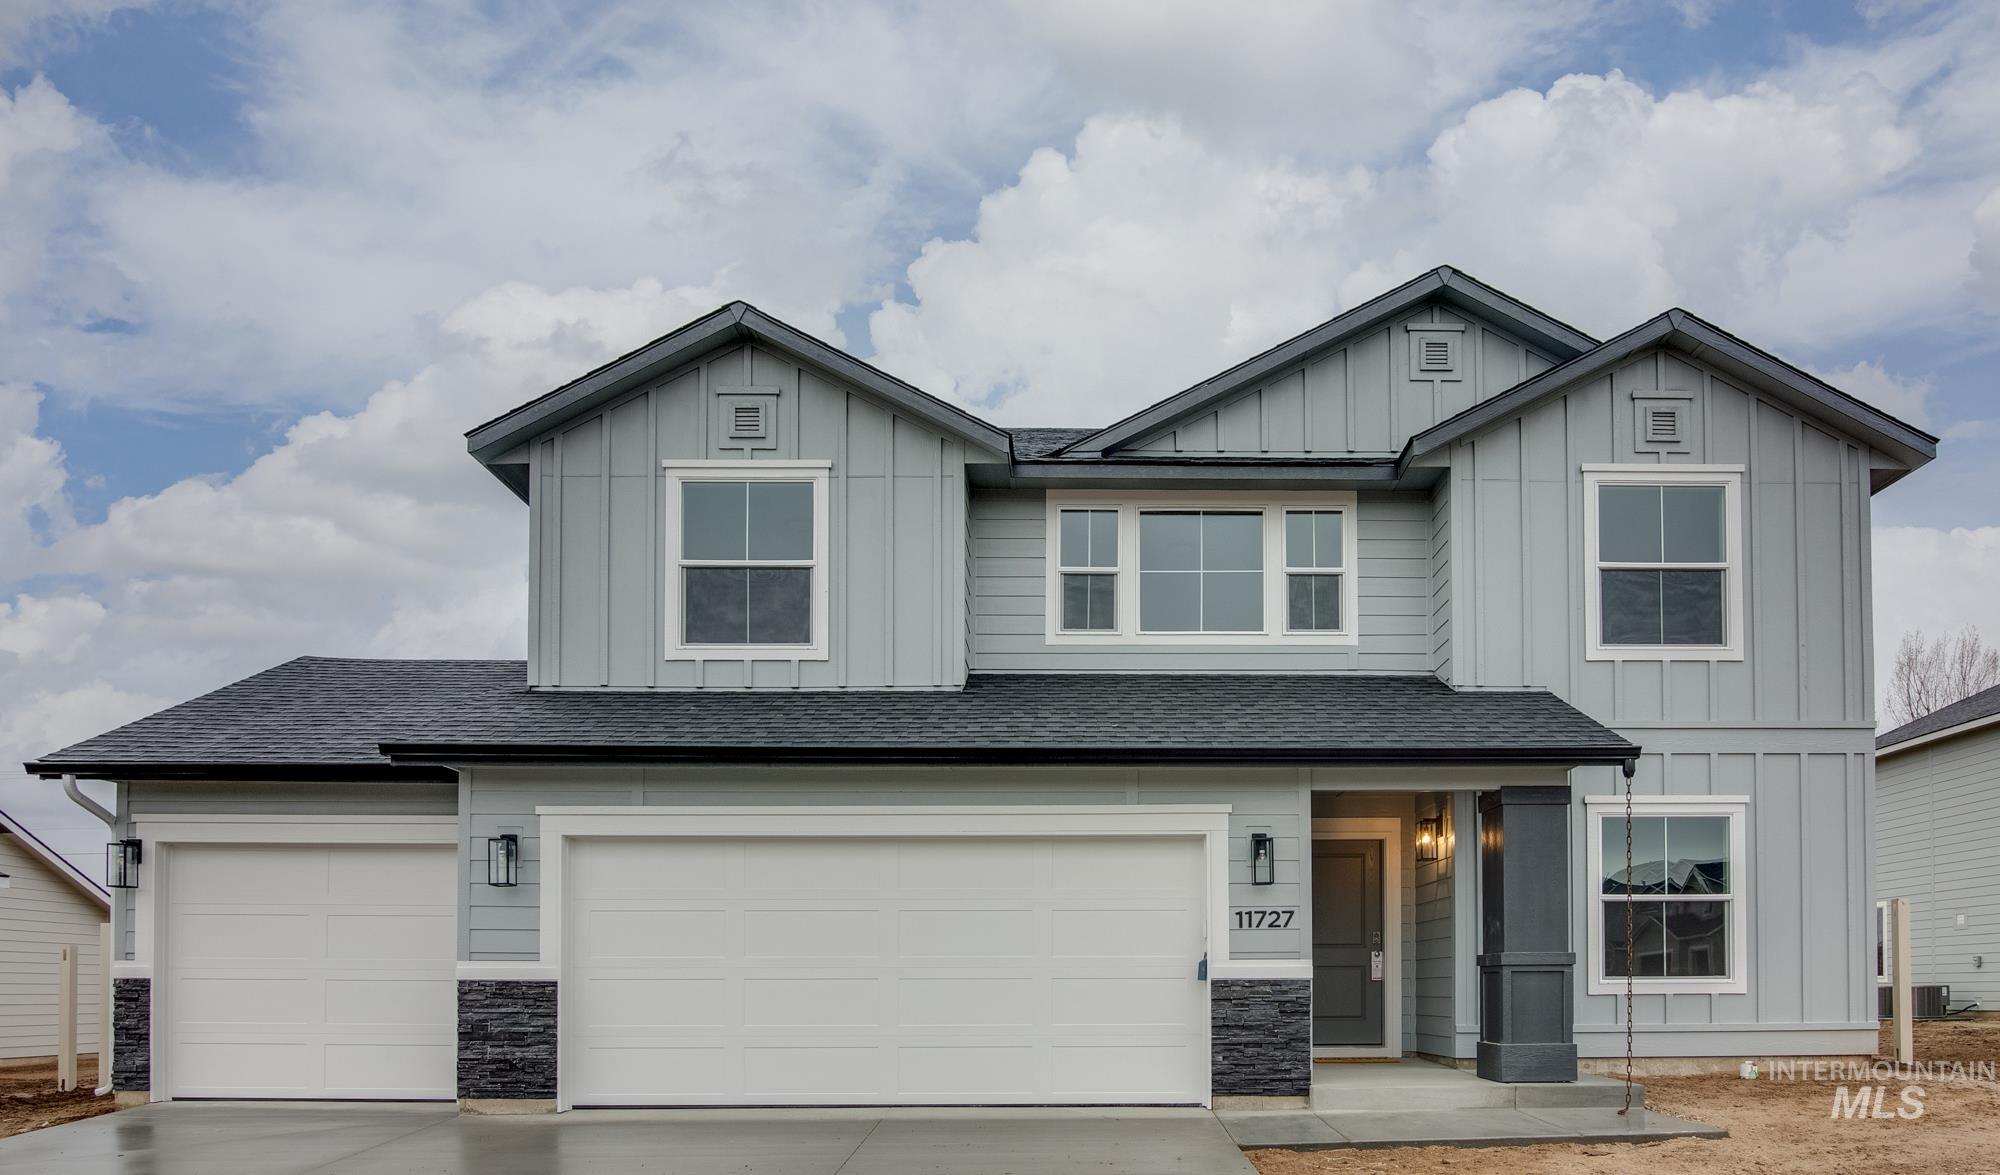 11727 W Red Clover St, Star, ID 83669